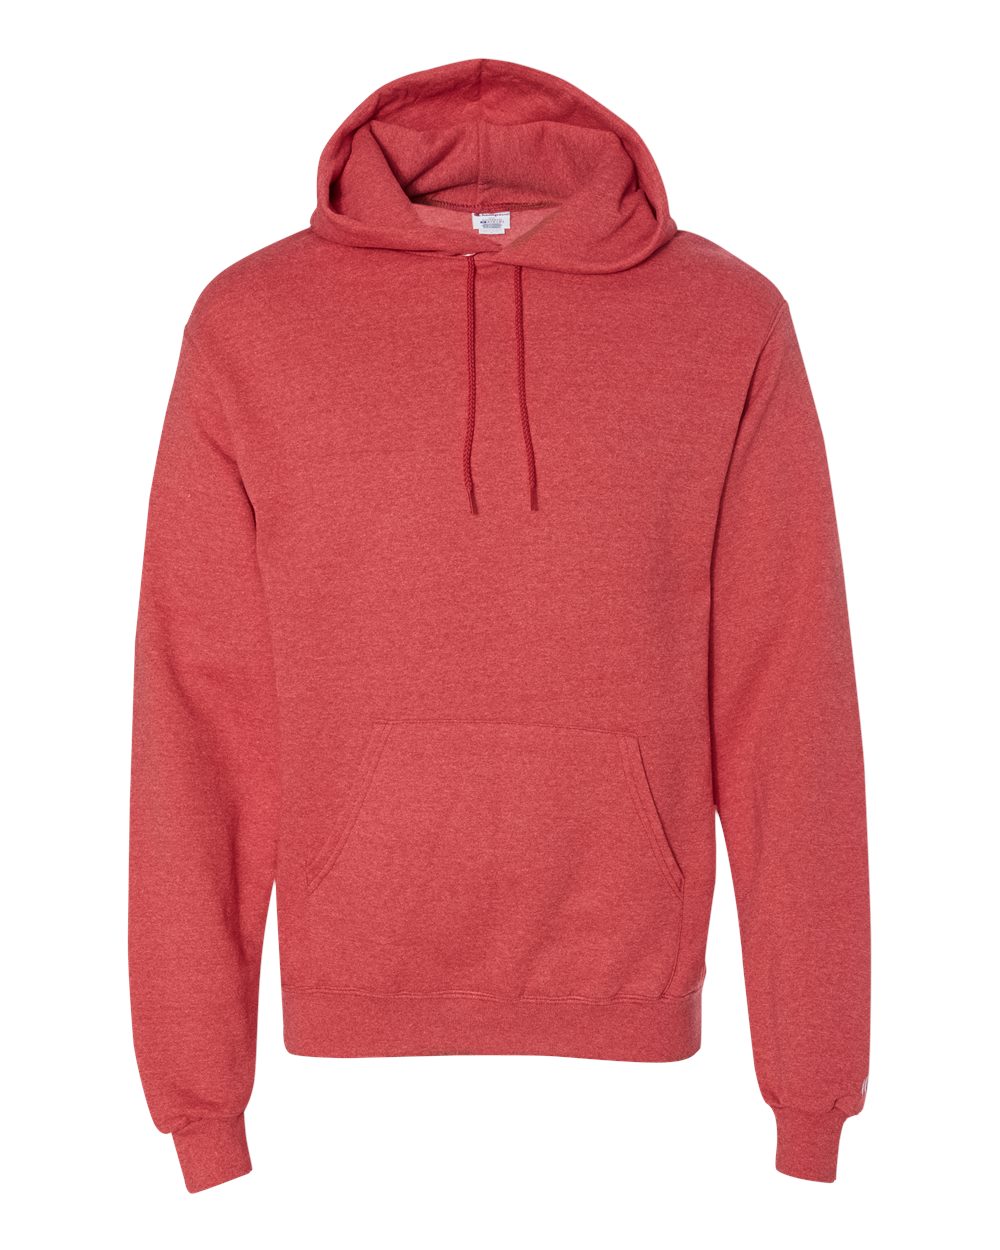 Champion Hoodie S700 in Scarlet Heather